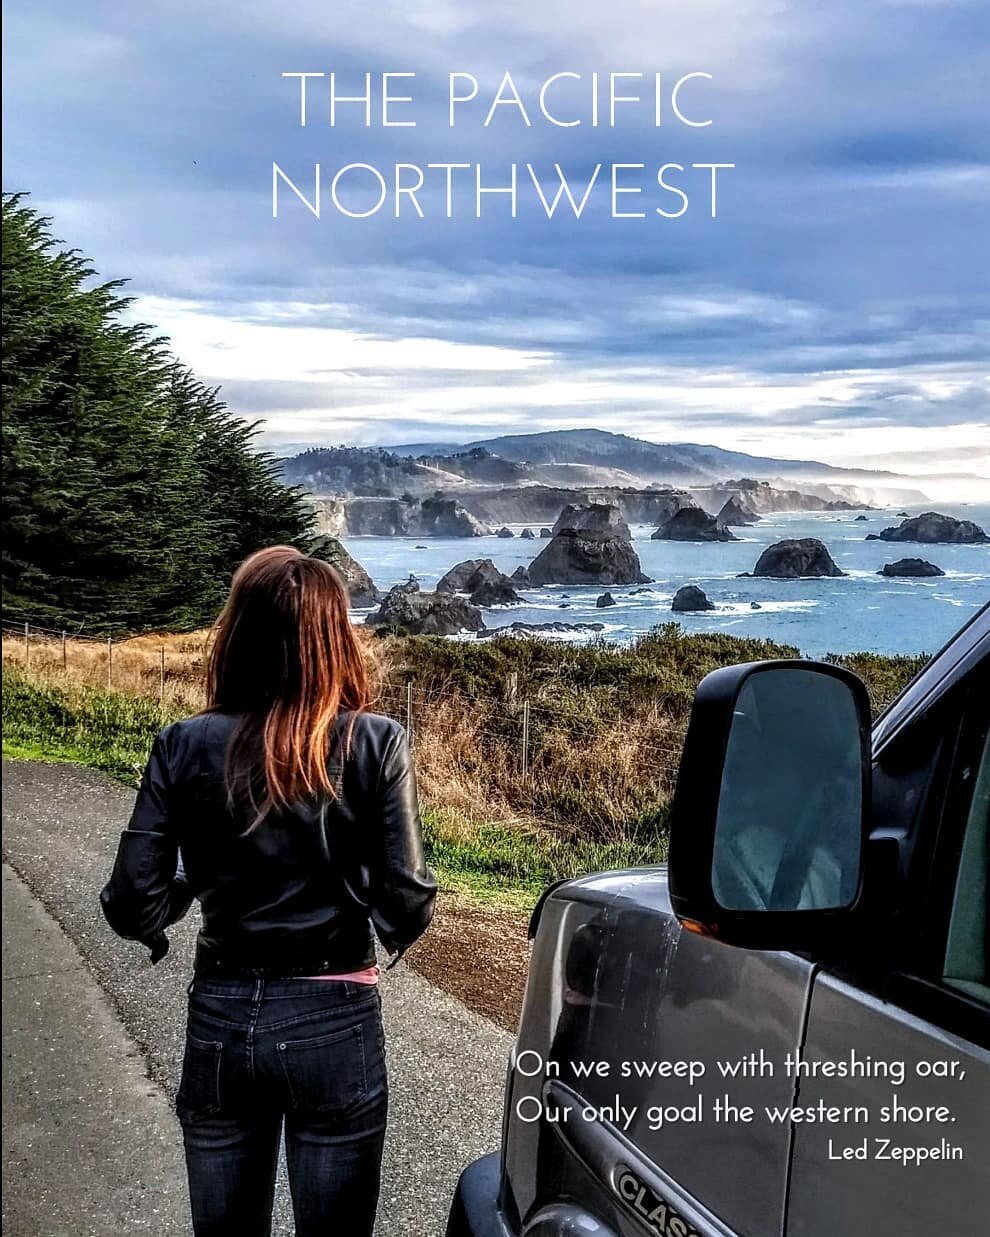 Our eBook is live tomorrow at 
www.lifeat90kph.com/ebook
and just in case you want one more teaser, here's a snippet from our chapter on the Pacific Northwest!

&quot;Wide white beaches stretch out along the coast for miles, interrupted by huge bould